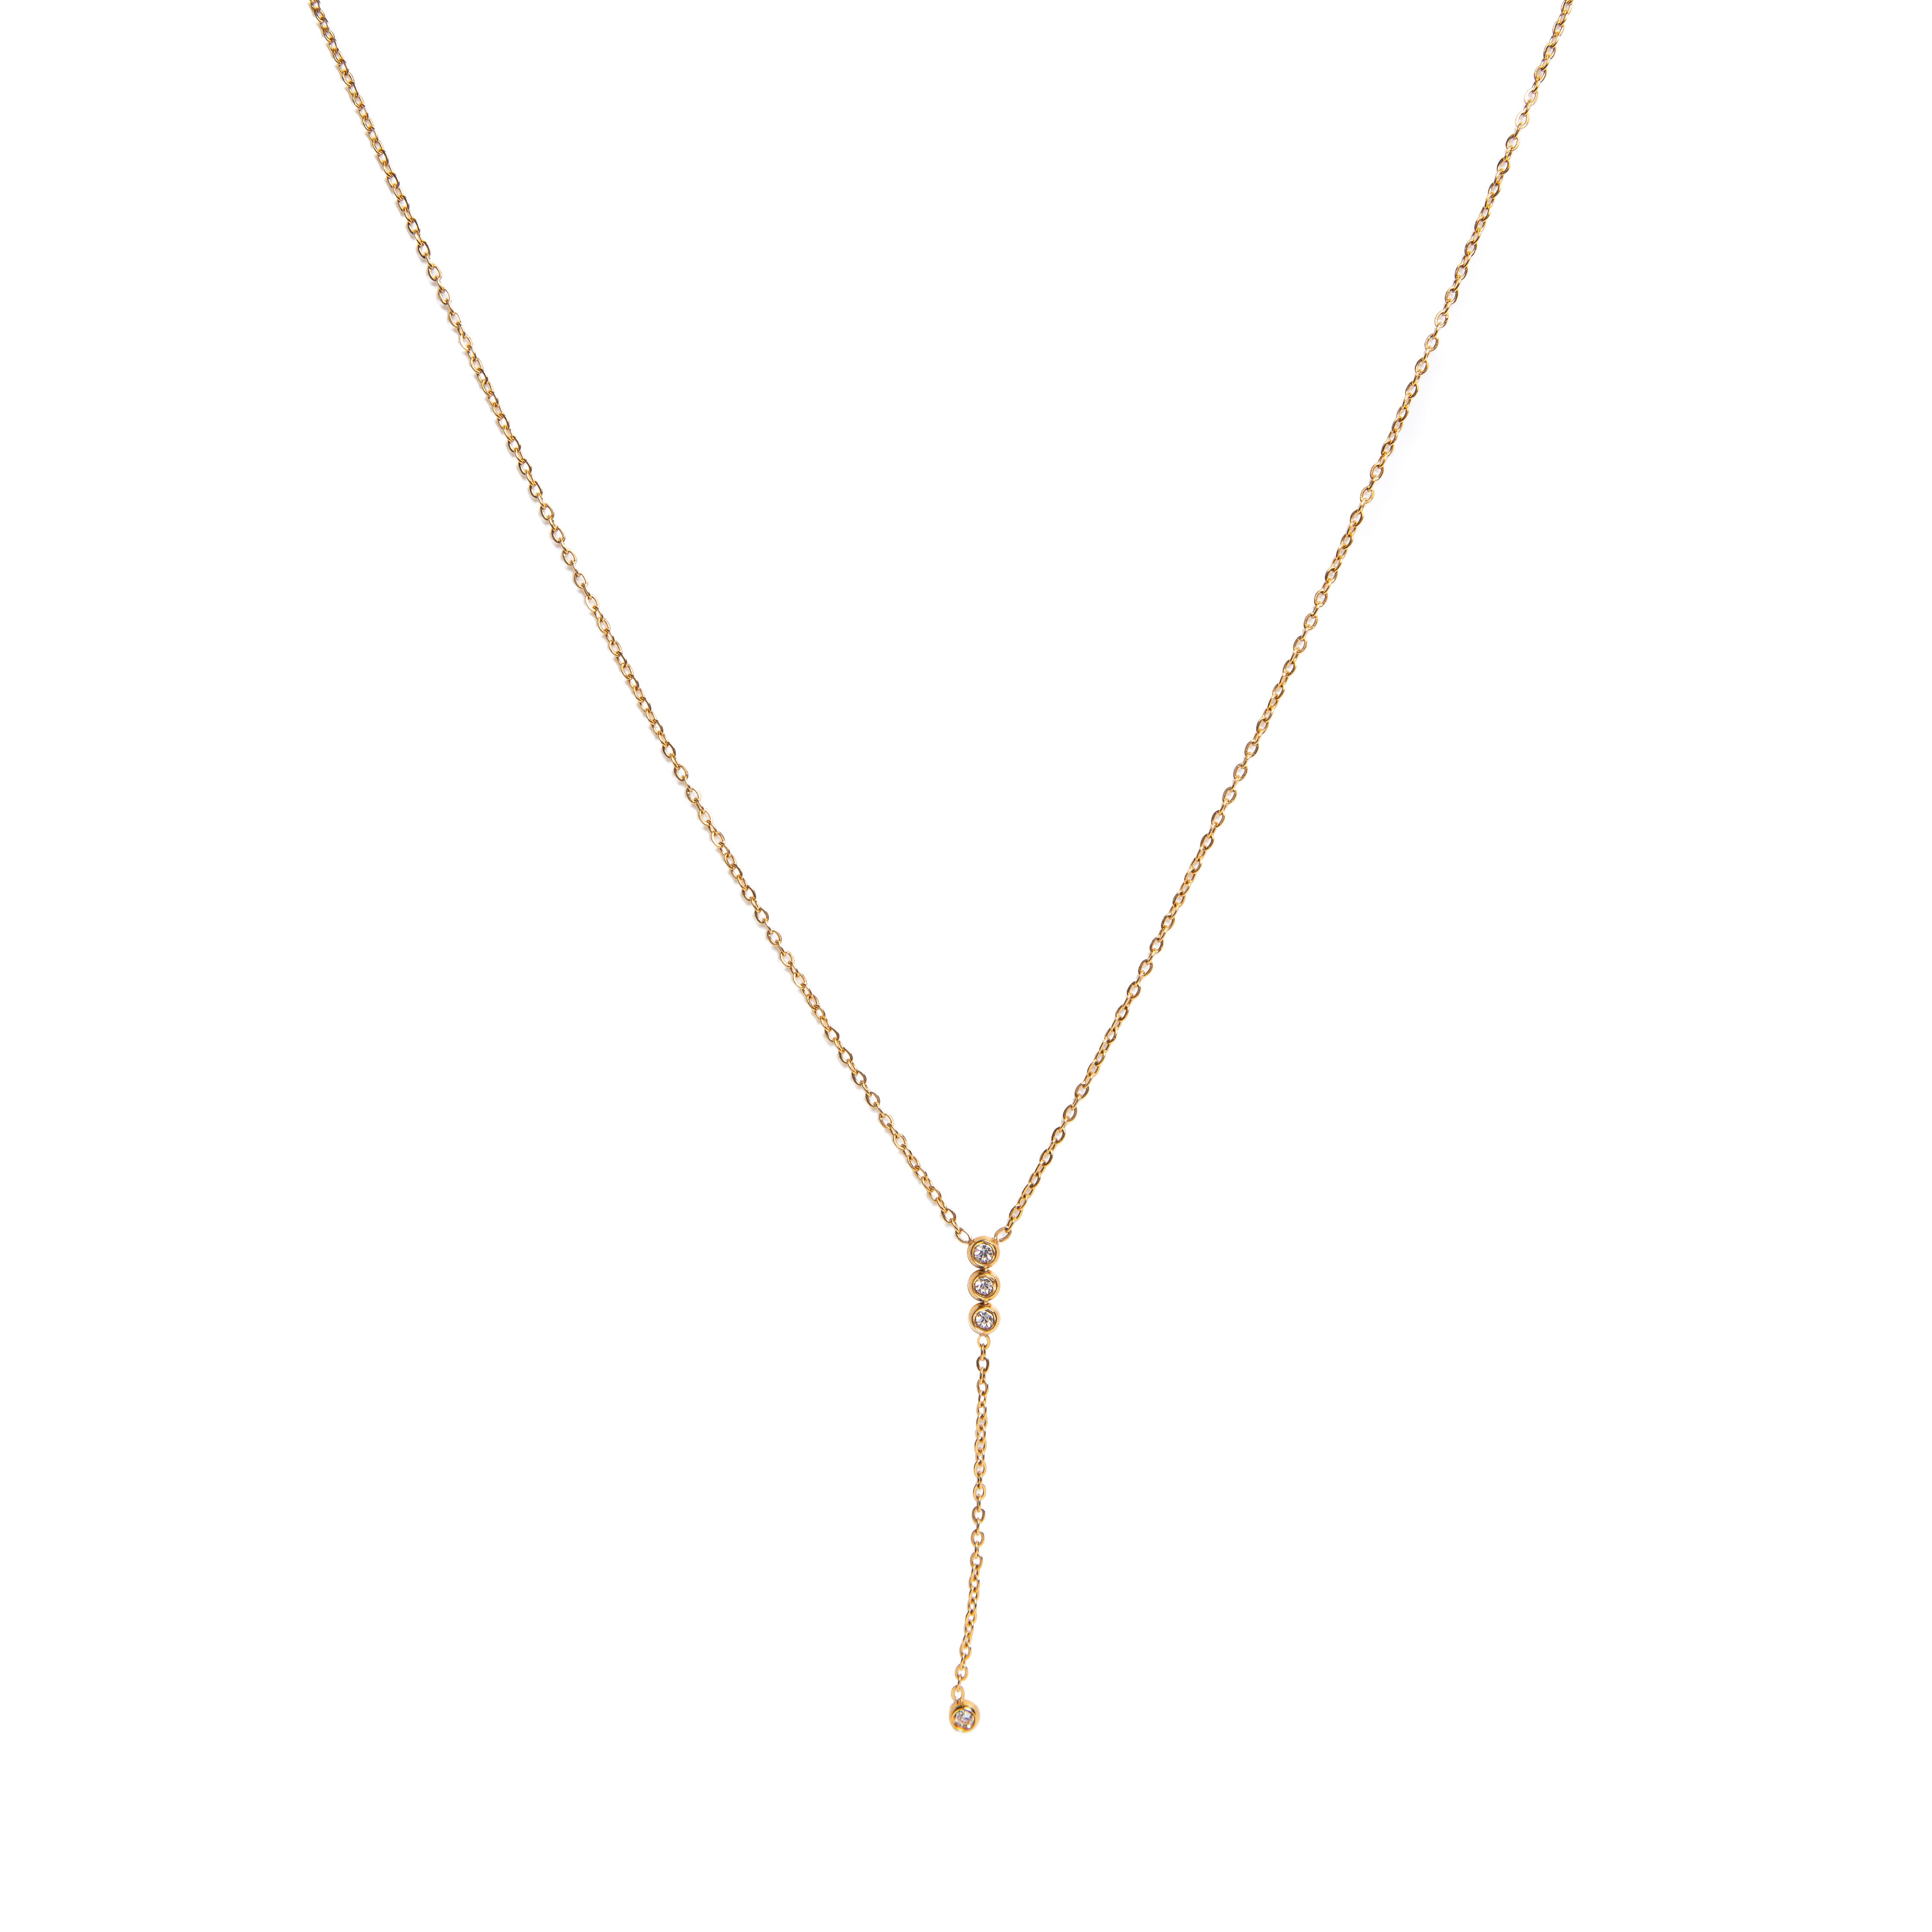 Our SIMPLE LARIAT NECKLACE was made for all you necklace stack lovers. It's simple but features three cubic zirconia (CZ) stones at the focal point to add a pop of sparkle. Wear as is, or layer it with our SENSE or AURA NECKLACE.  18k gold plated on stainless steel. Length: 18” Extender: 2” All the necklaces come in a beautiful jewelry box.